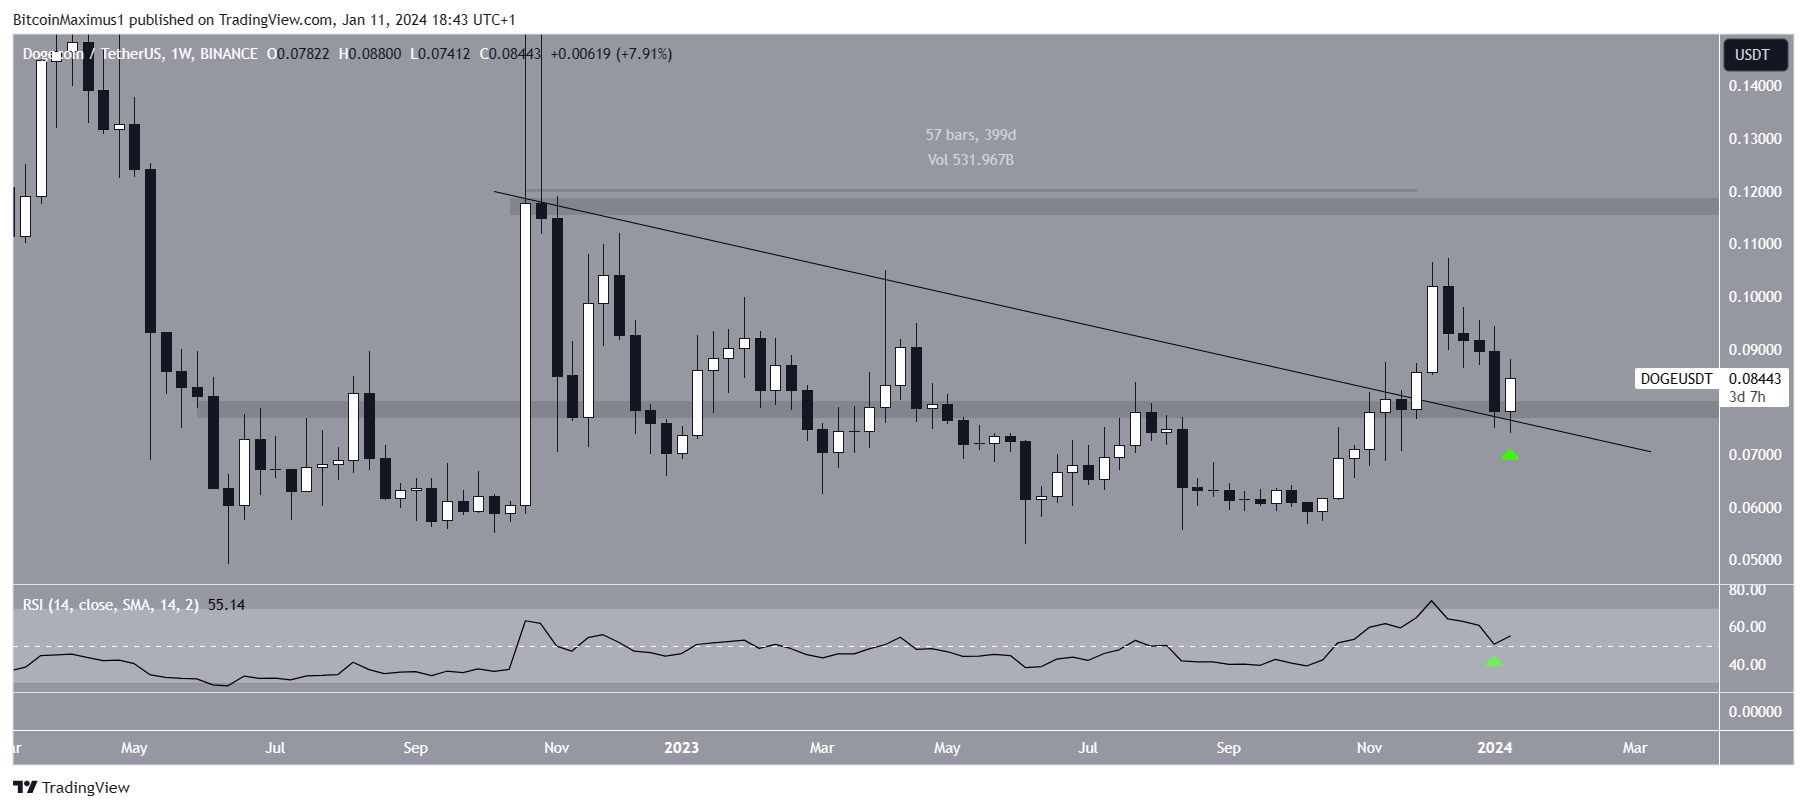 Dogecoin (DOGE) Price Movement Weekly